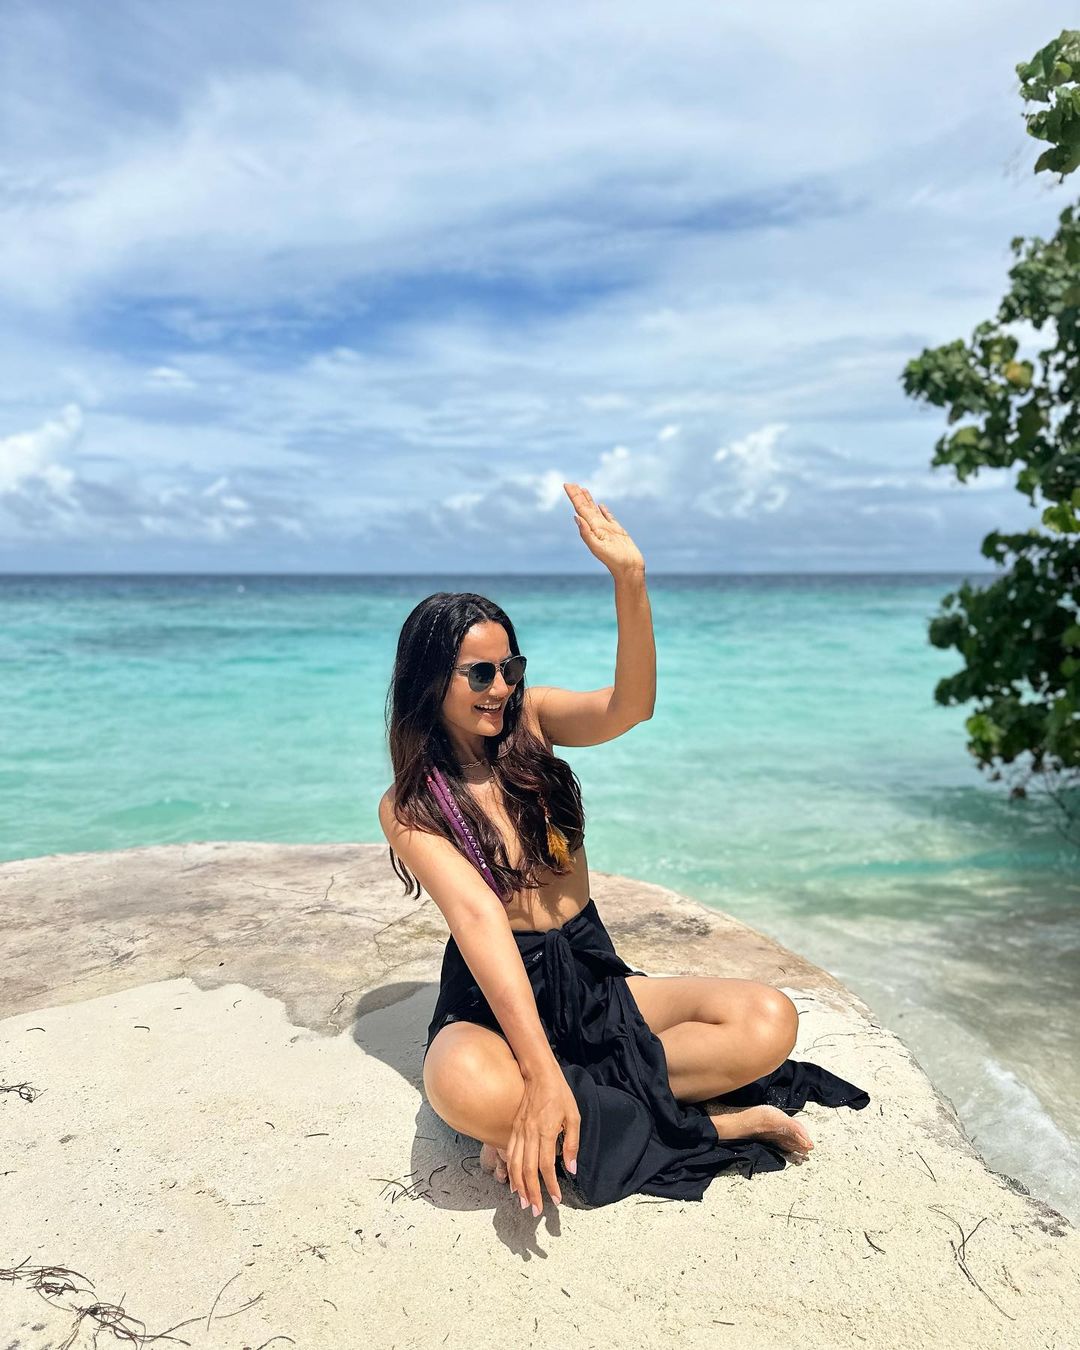 Actress surbhi jyoti latest beach vacation clicks-Actresssurbhi, Surbhijyoti, Surbhi Jyoti Photos,Spicy Hot Pics,Images,High Resolution WallPapers Download